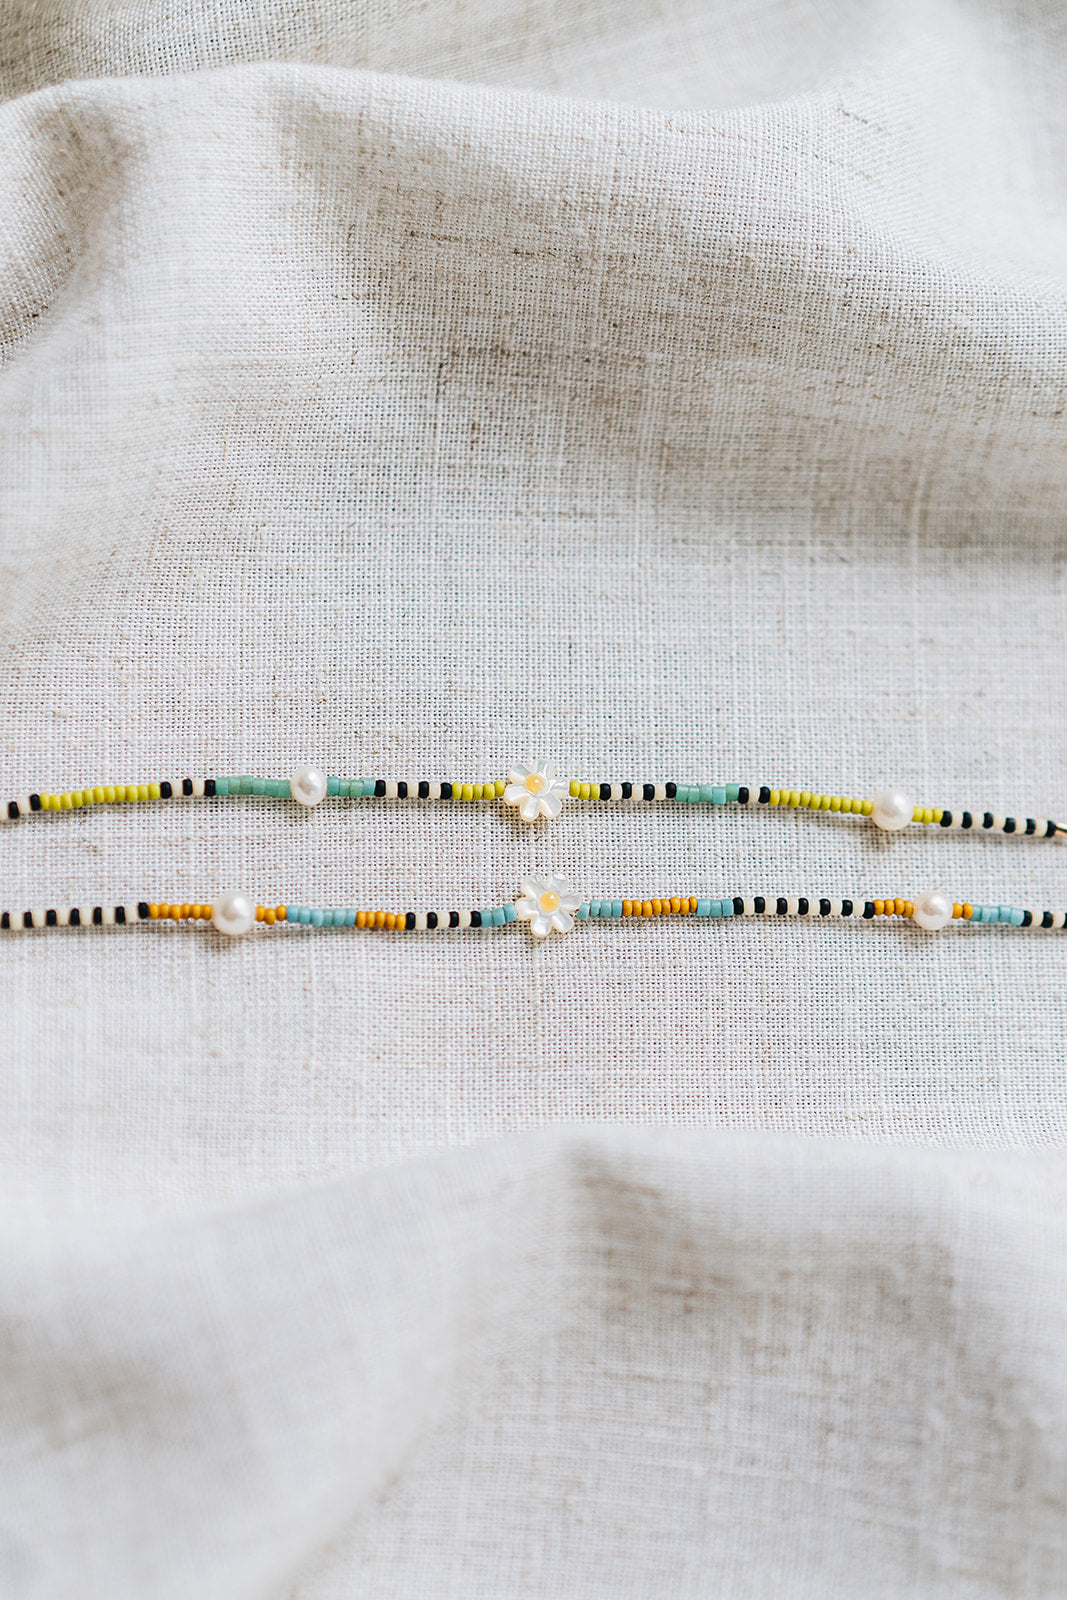 How to Make a Daisy Chain Beading Stitch